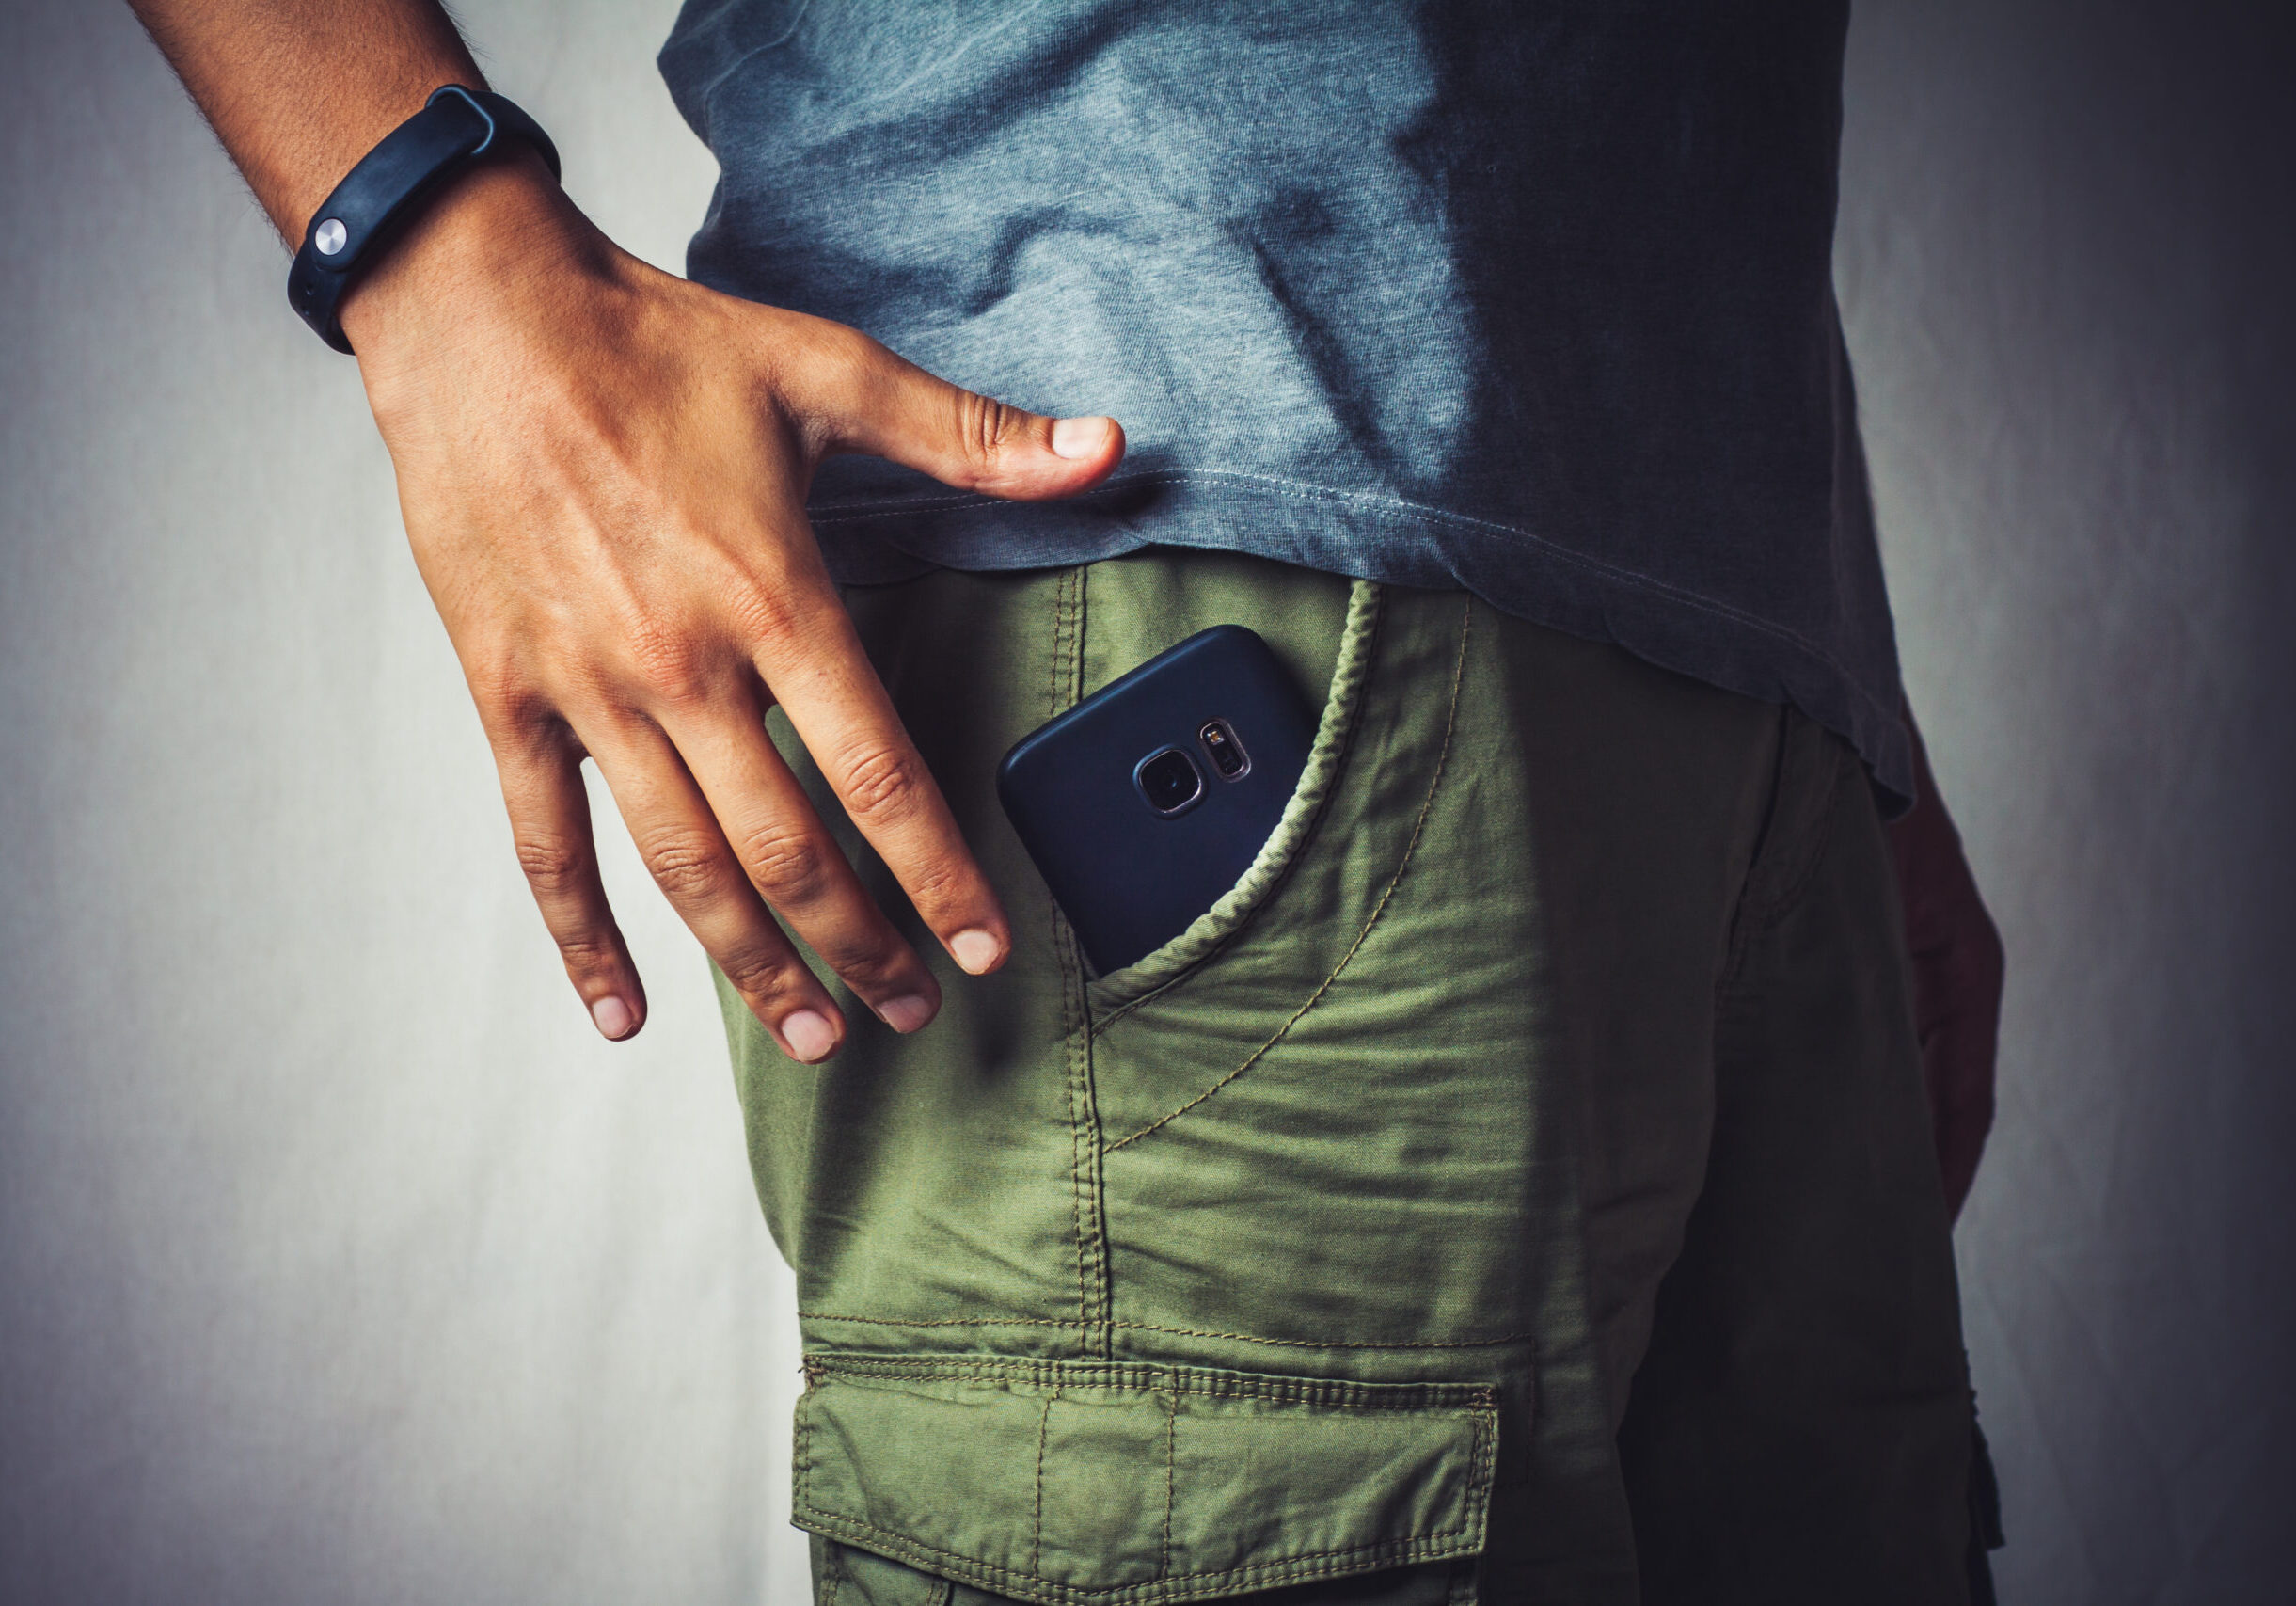 close-up of a hand about to taking a smart phone from a pant's pocket